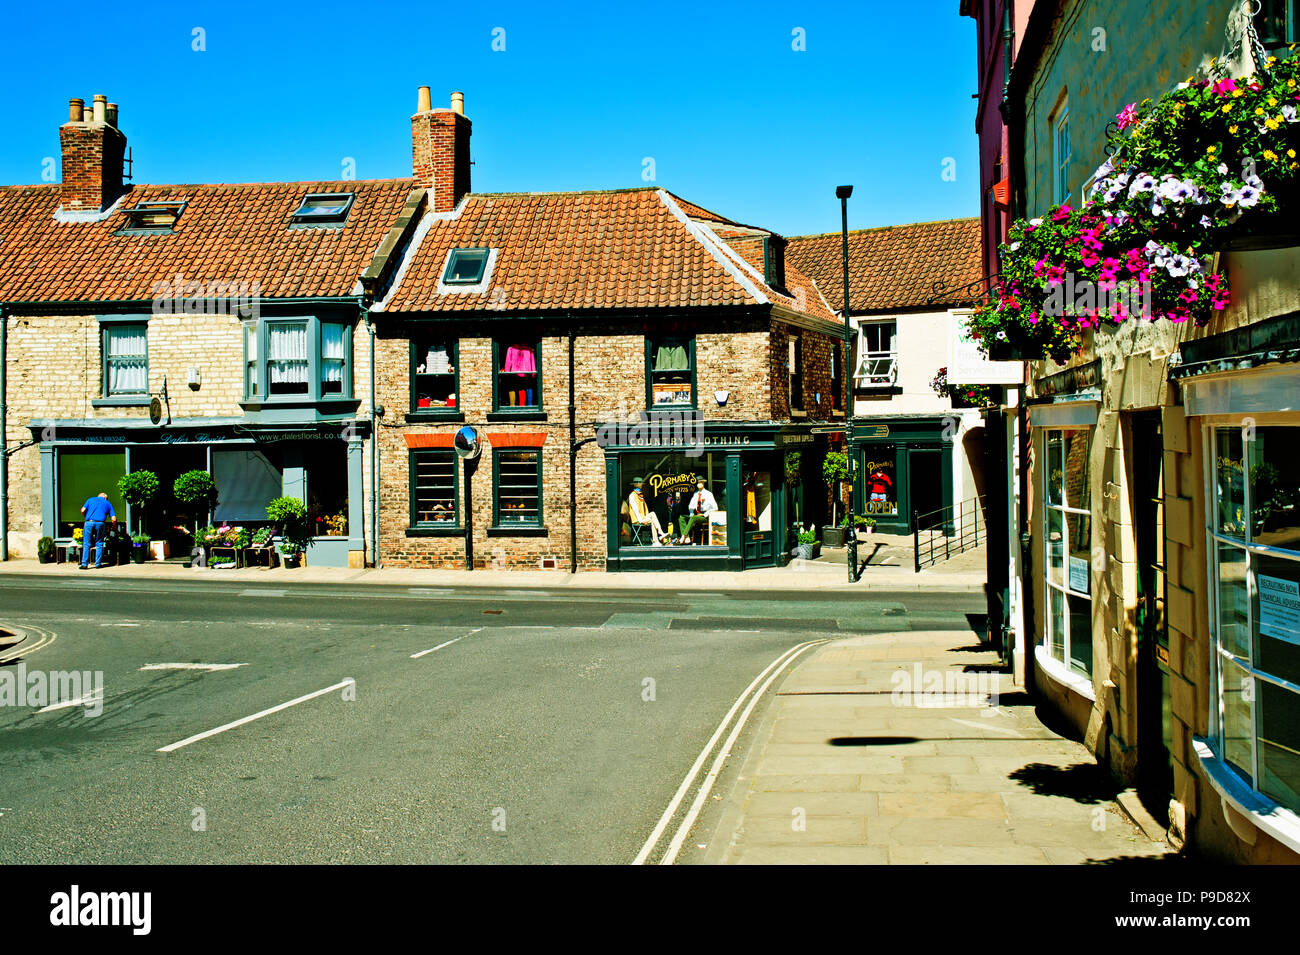 Florists and country clothing shops, Malton, North Yorkshire, England Stock Photo